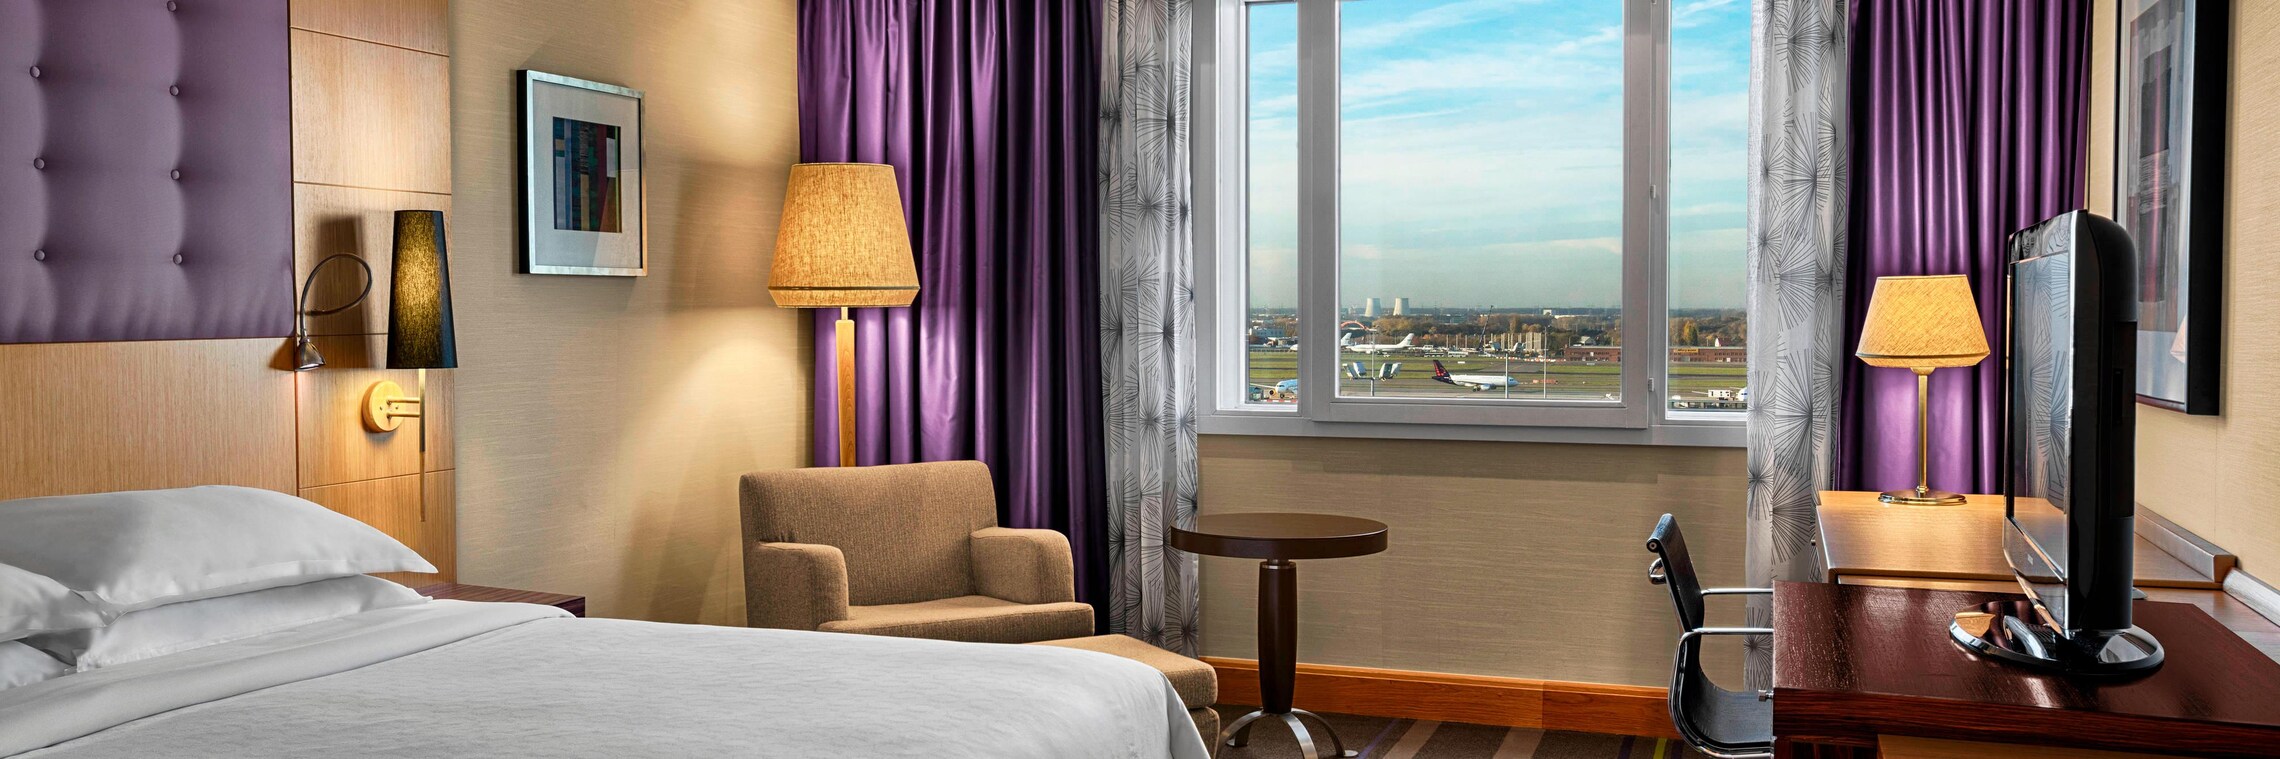 King Guest Room - Airport View